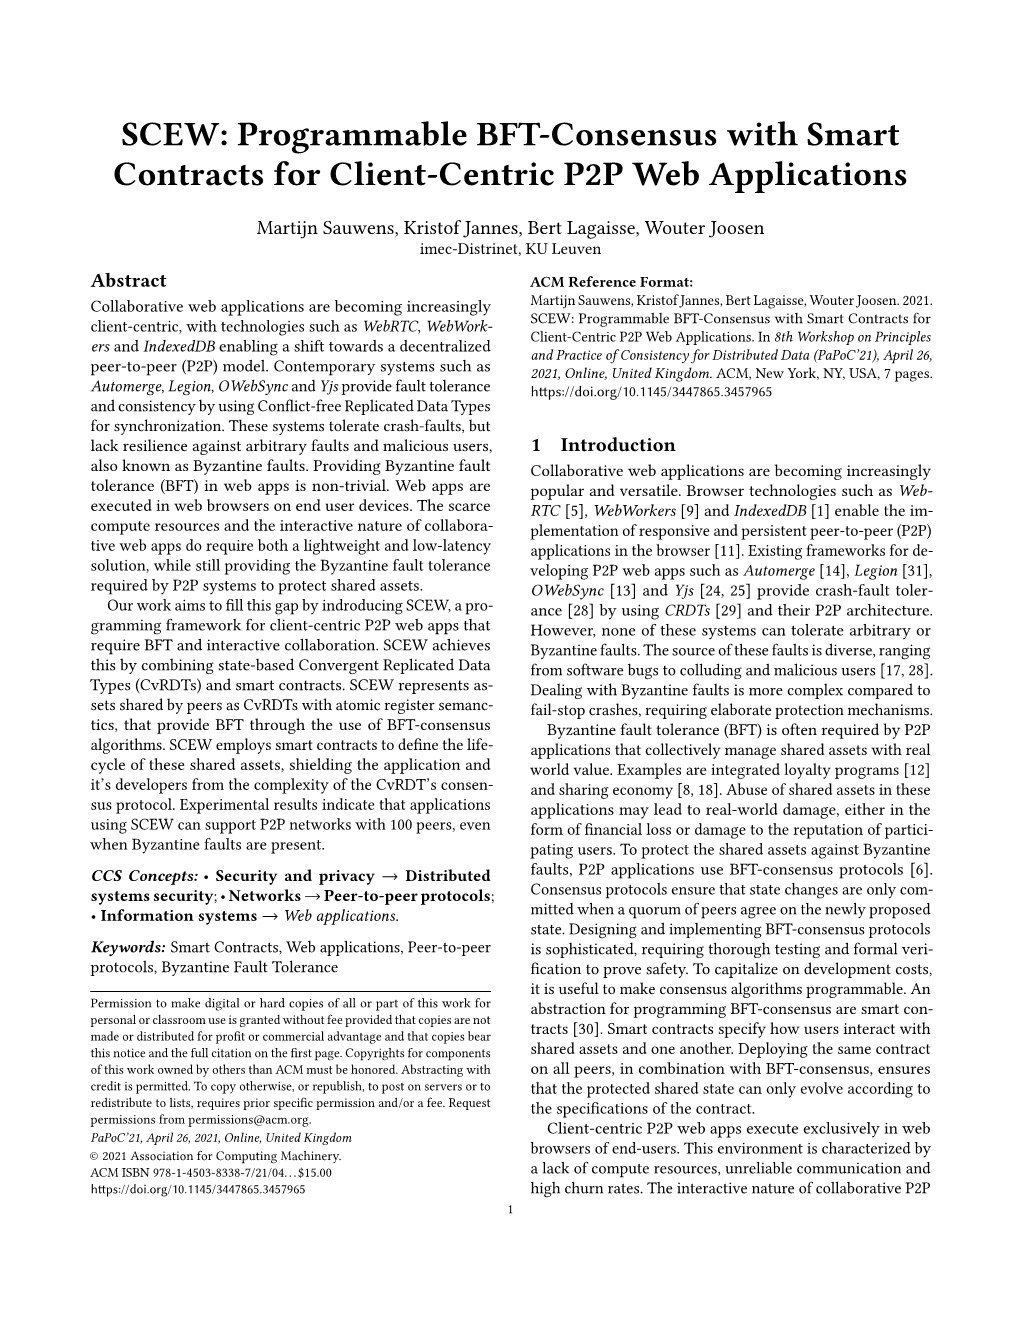 Programmable BFT-Consensus with Smart Contracts for Client-Centric P2P Web Applications